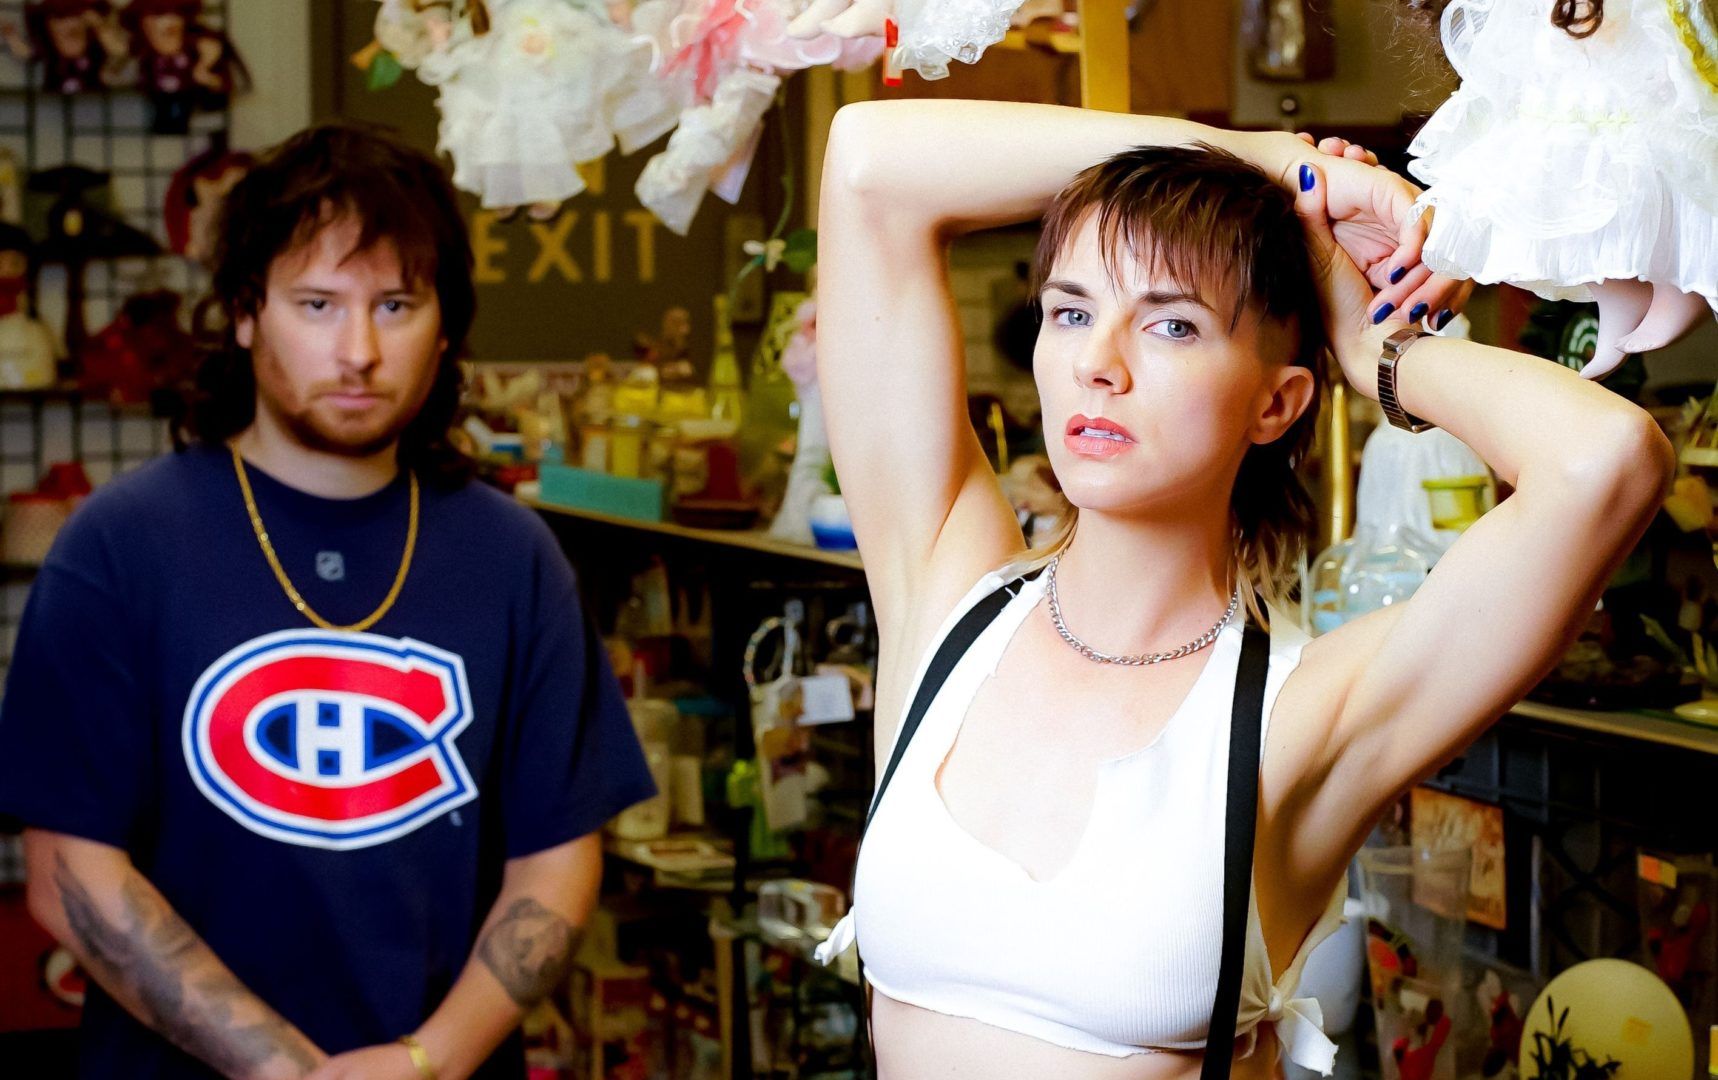 a portrait of the members of the band broken baby, showing a person wearing a white tank top in the foreground and a person wearing a cubs jersey in the background